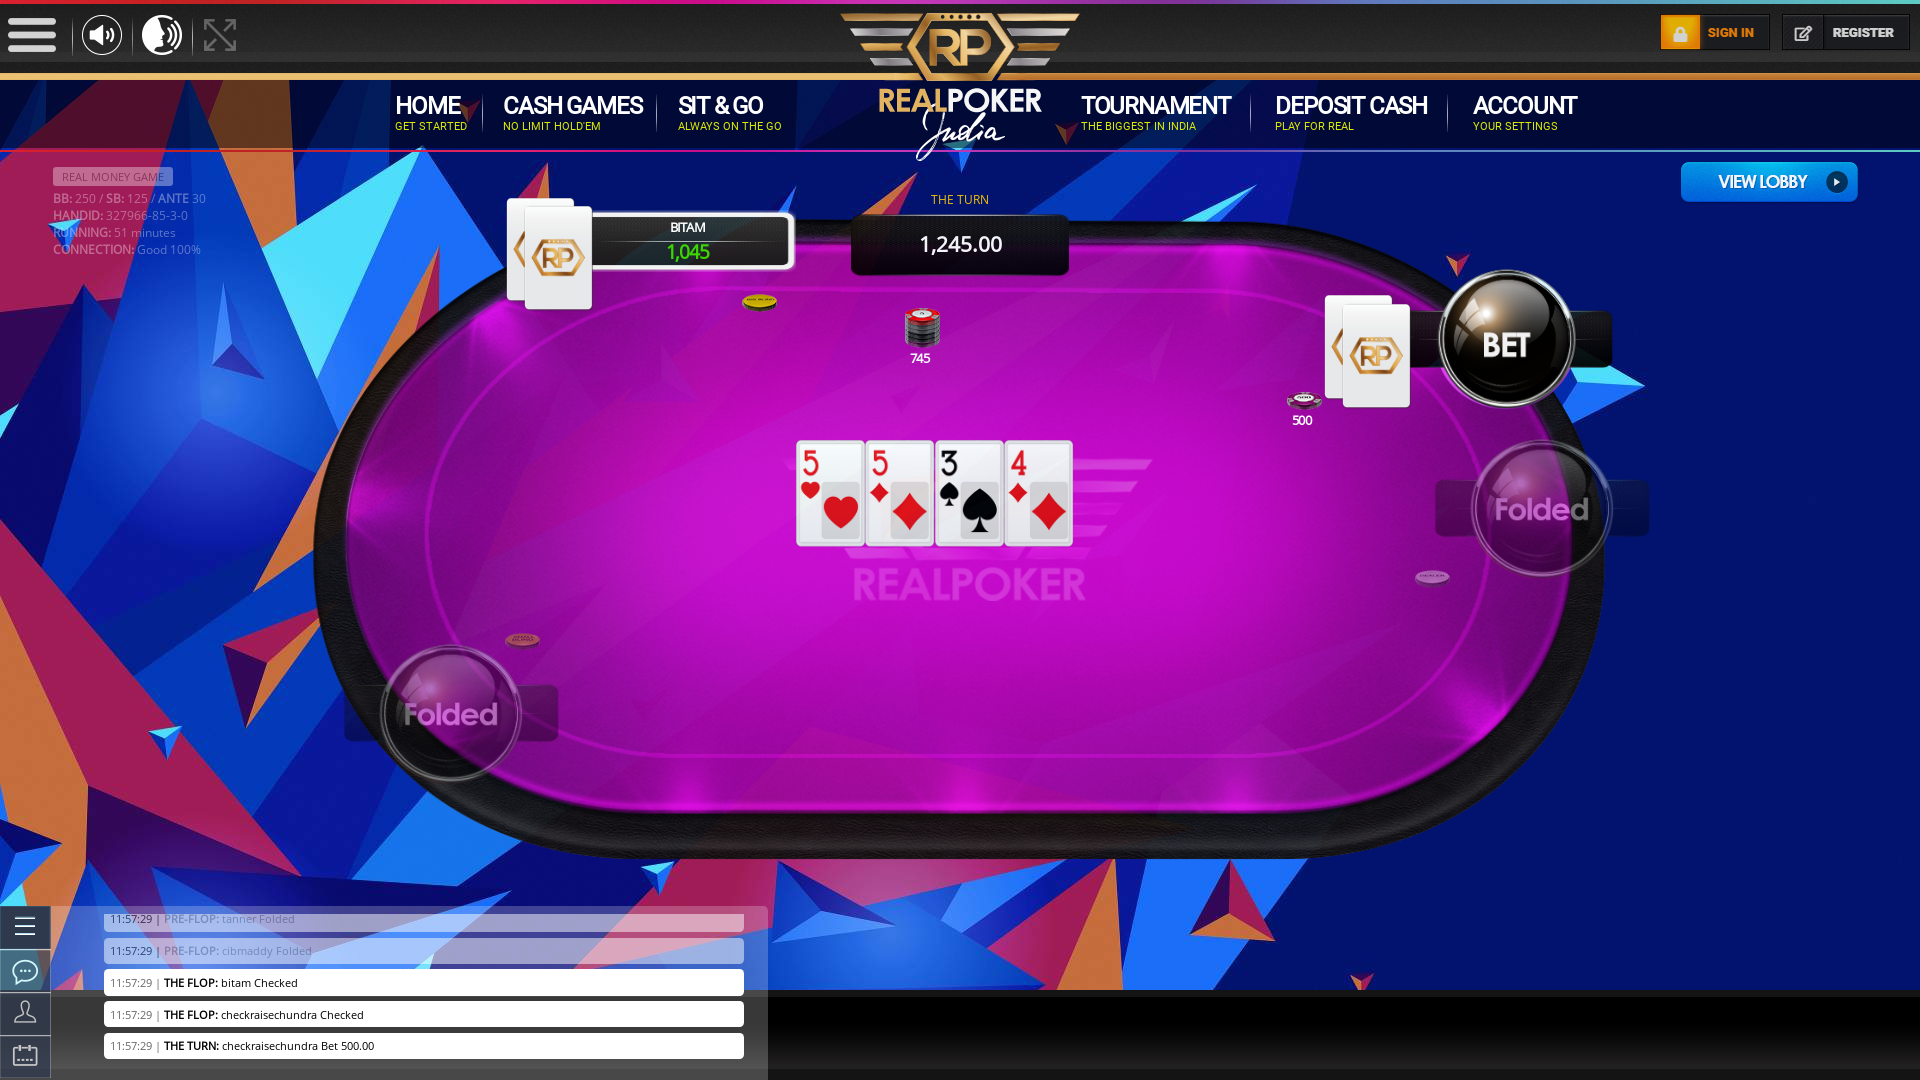 Indian poker on a 10 player table in the 51st minute